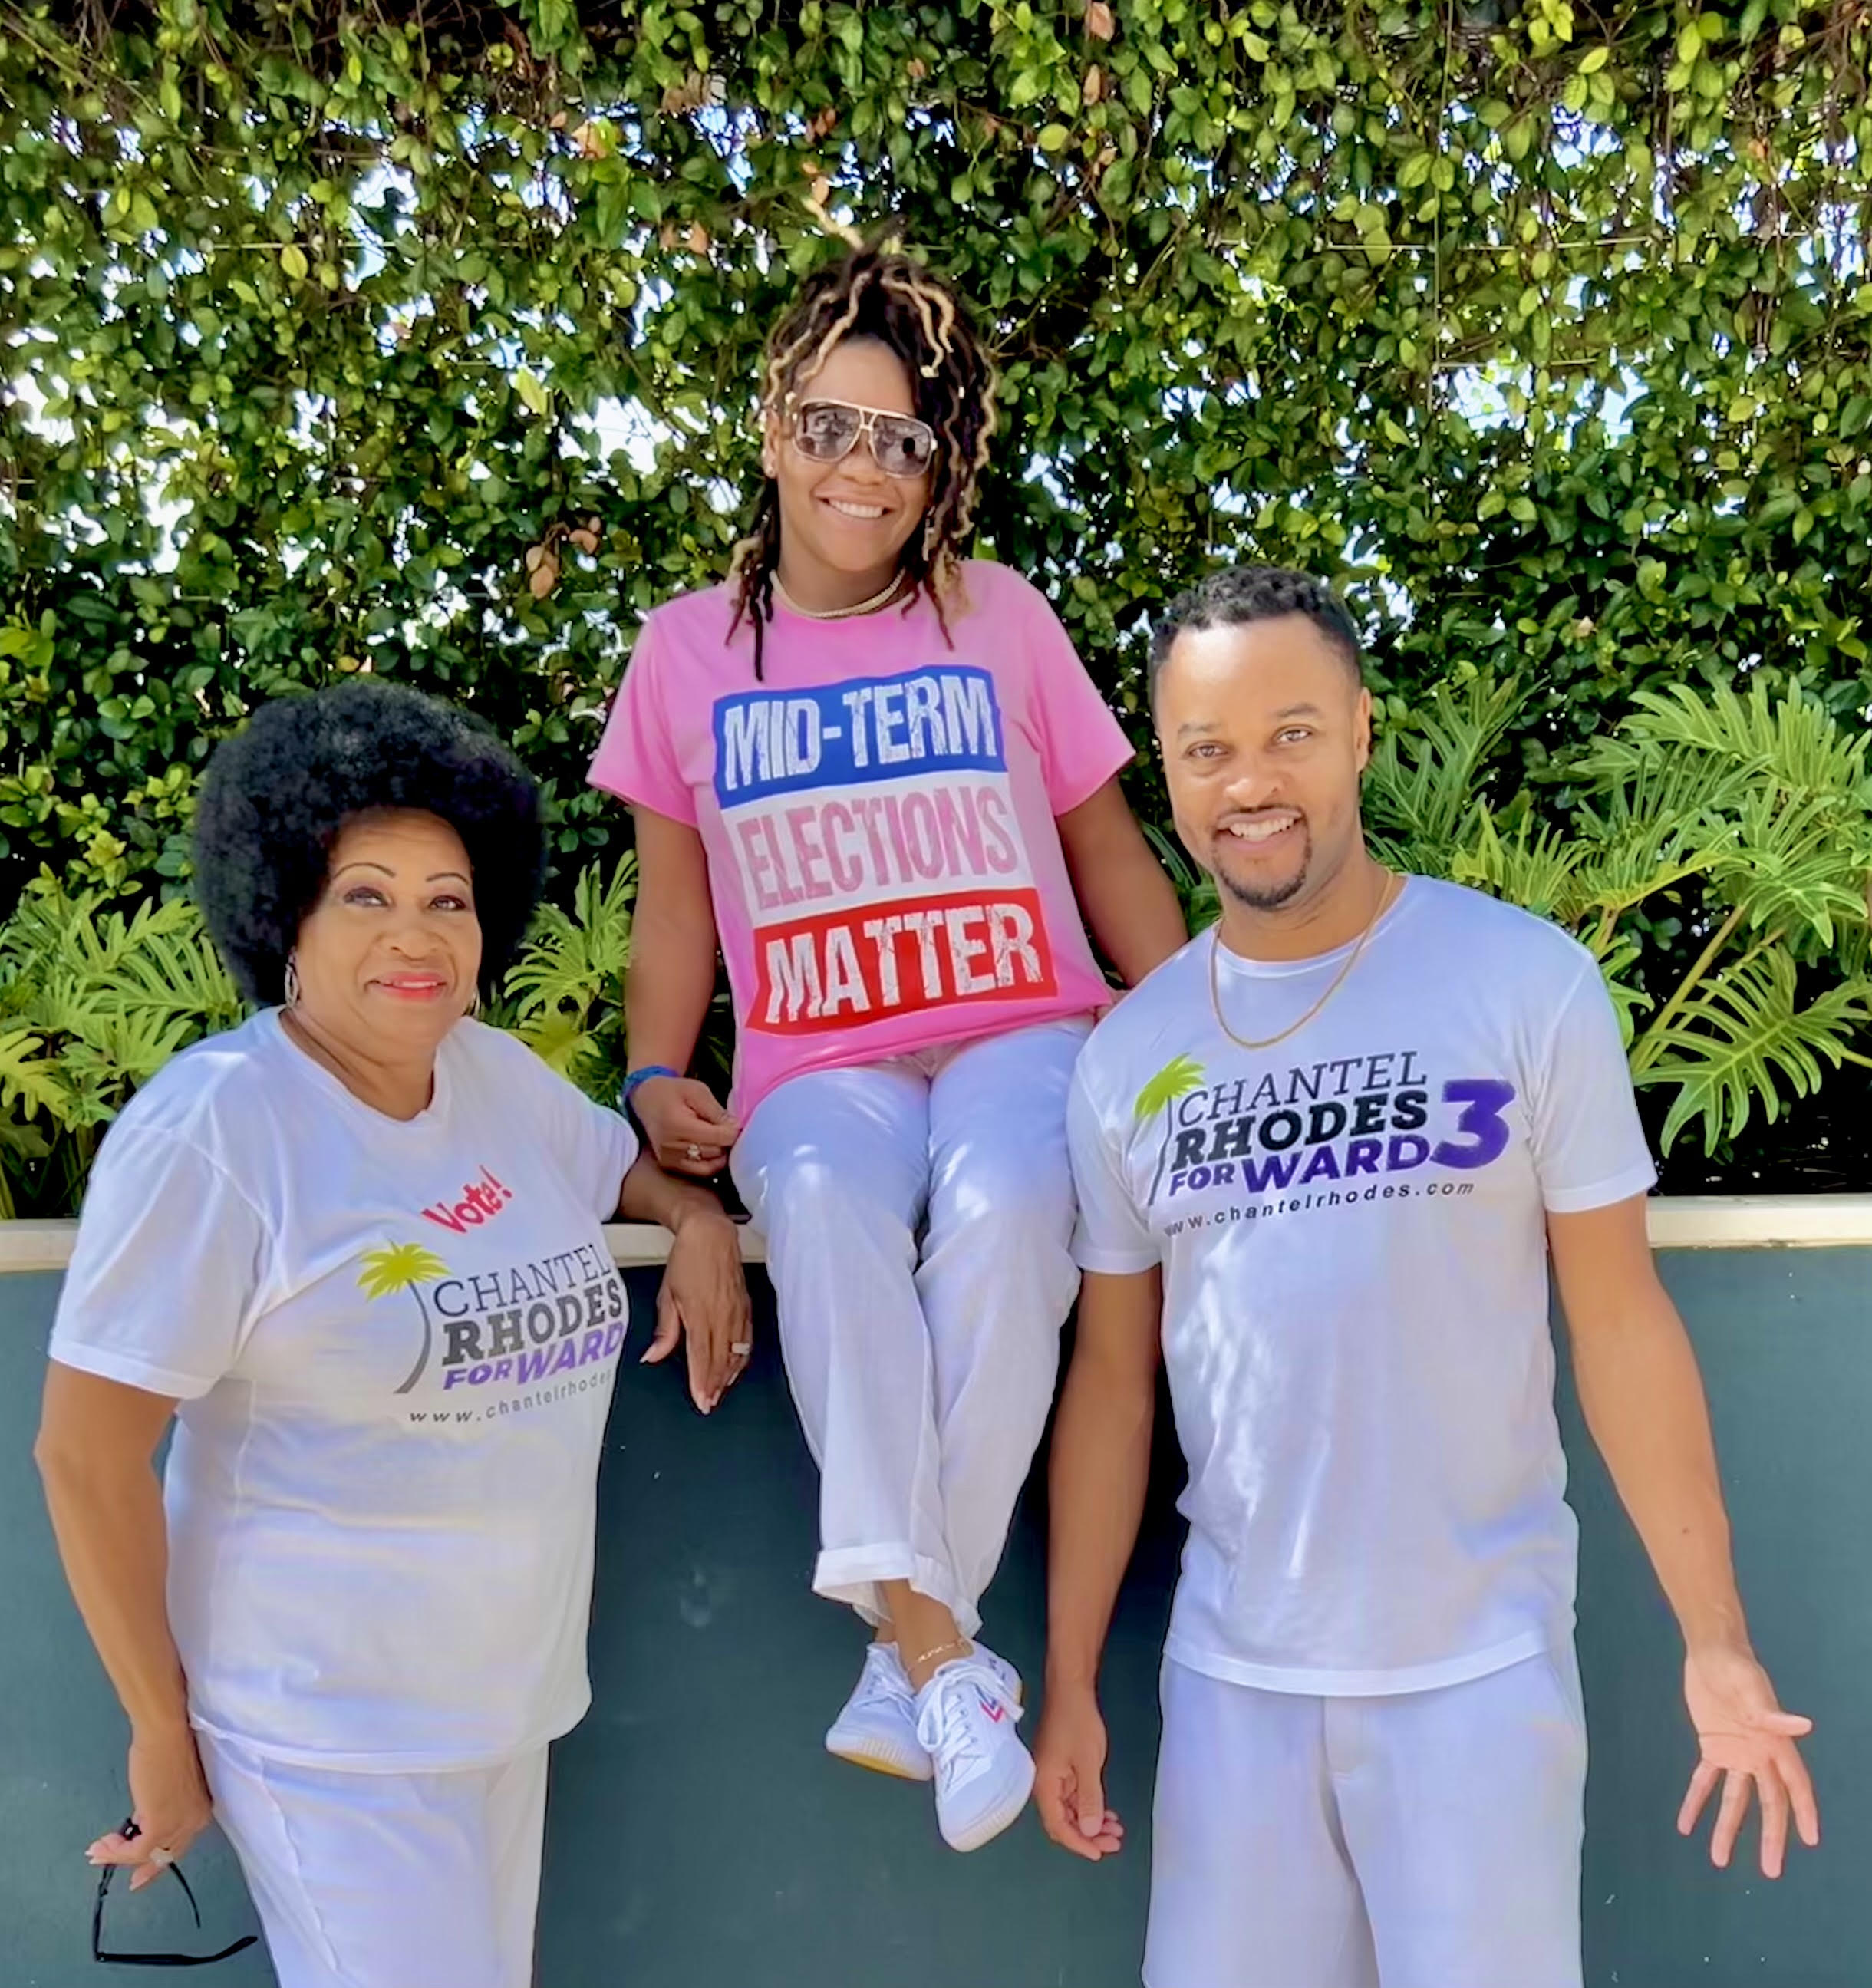 Chantel Rhodes (center), candidate for Ft.  Myers City Council District 3 with her mother Darlene (left) and bother Chuck (right).